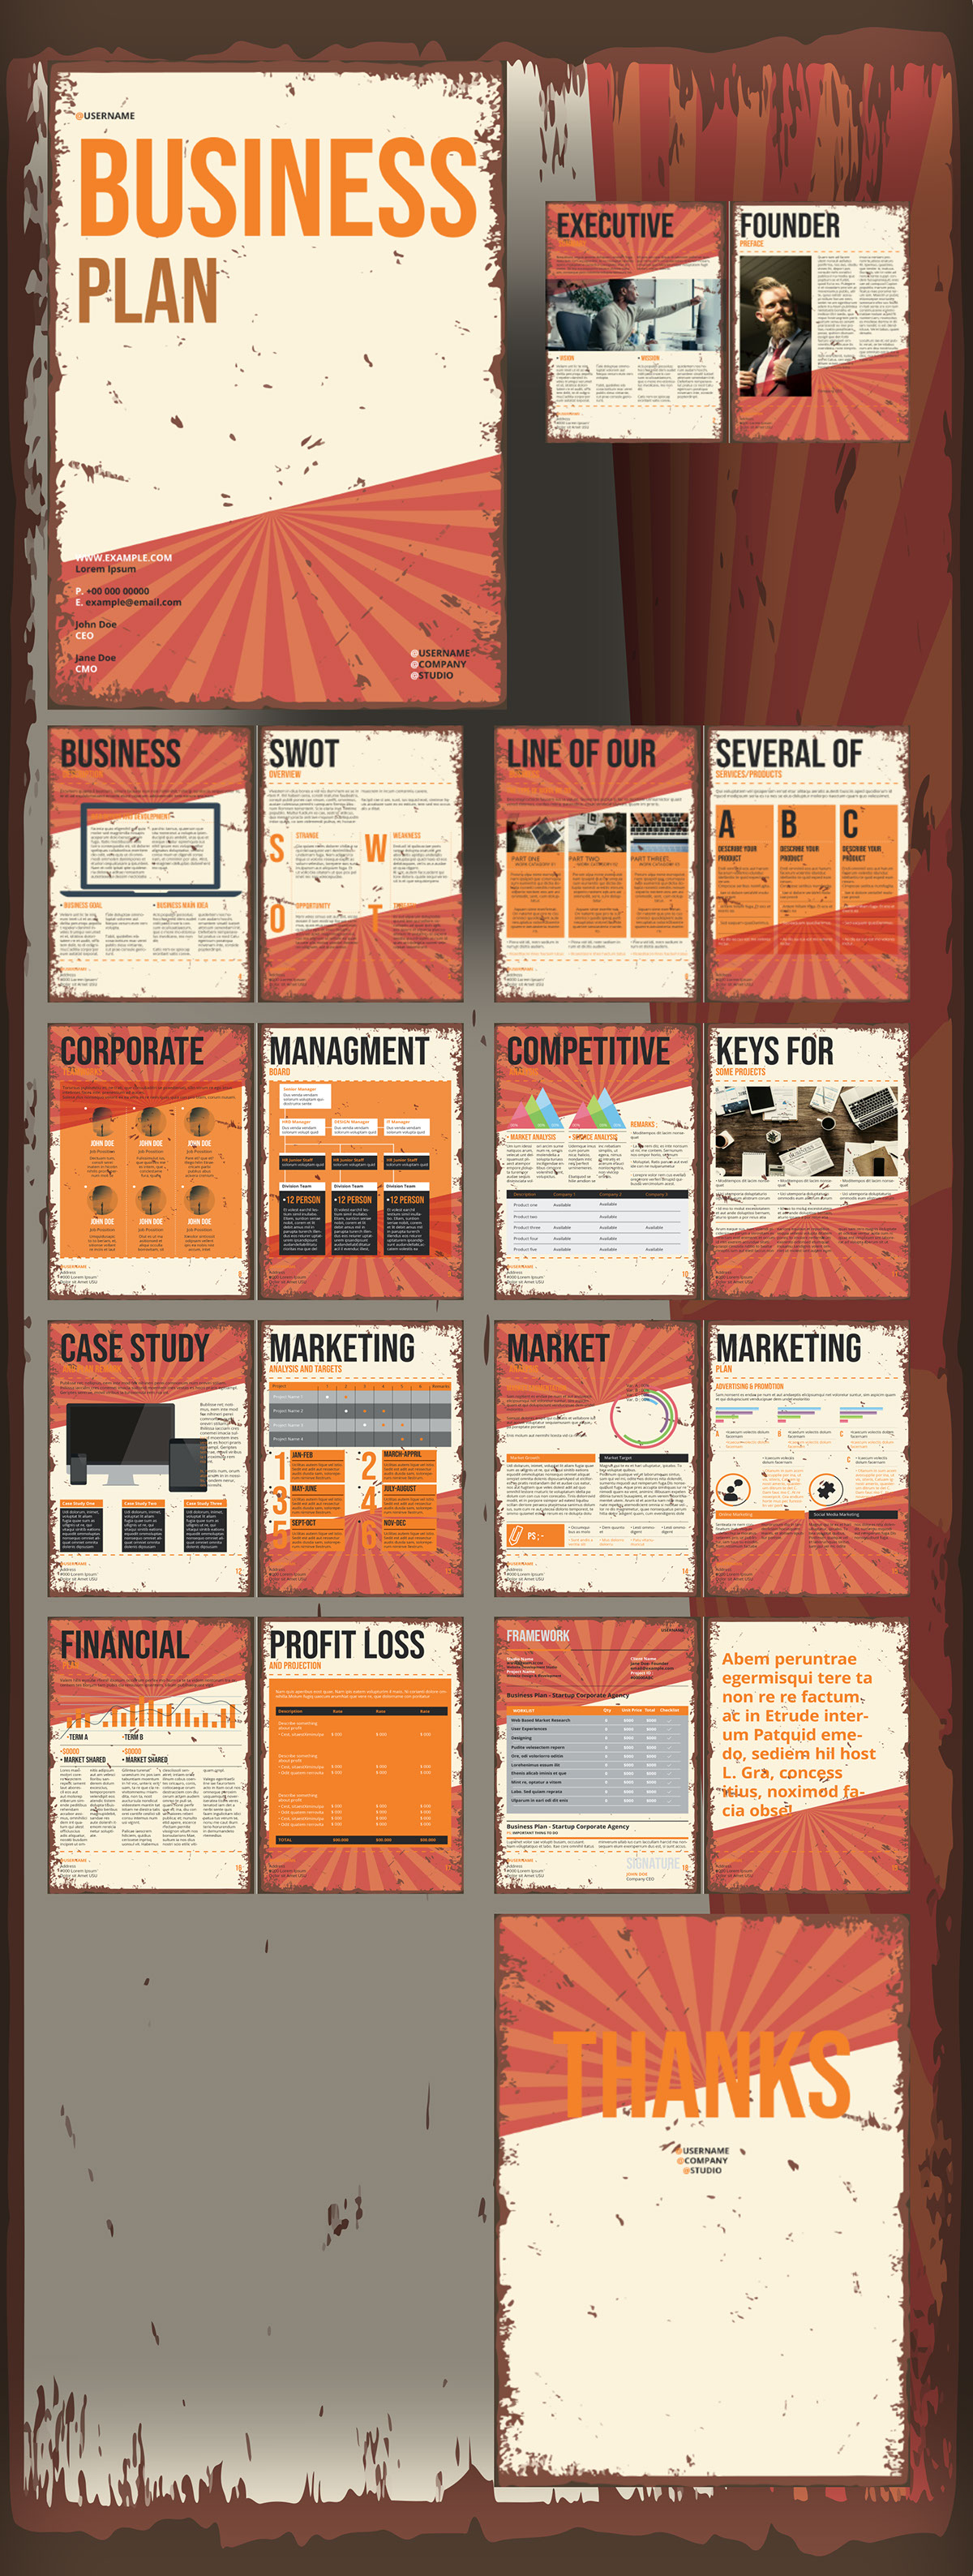 Business Plan Layouts With Vintage Backgrounds rendition image